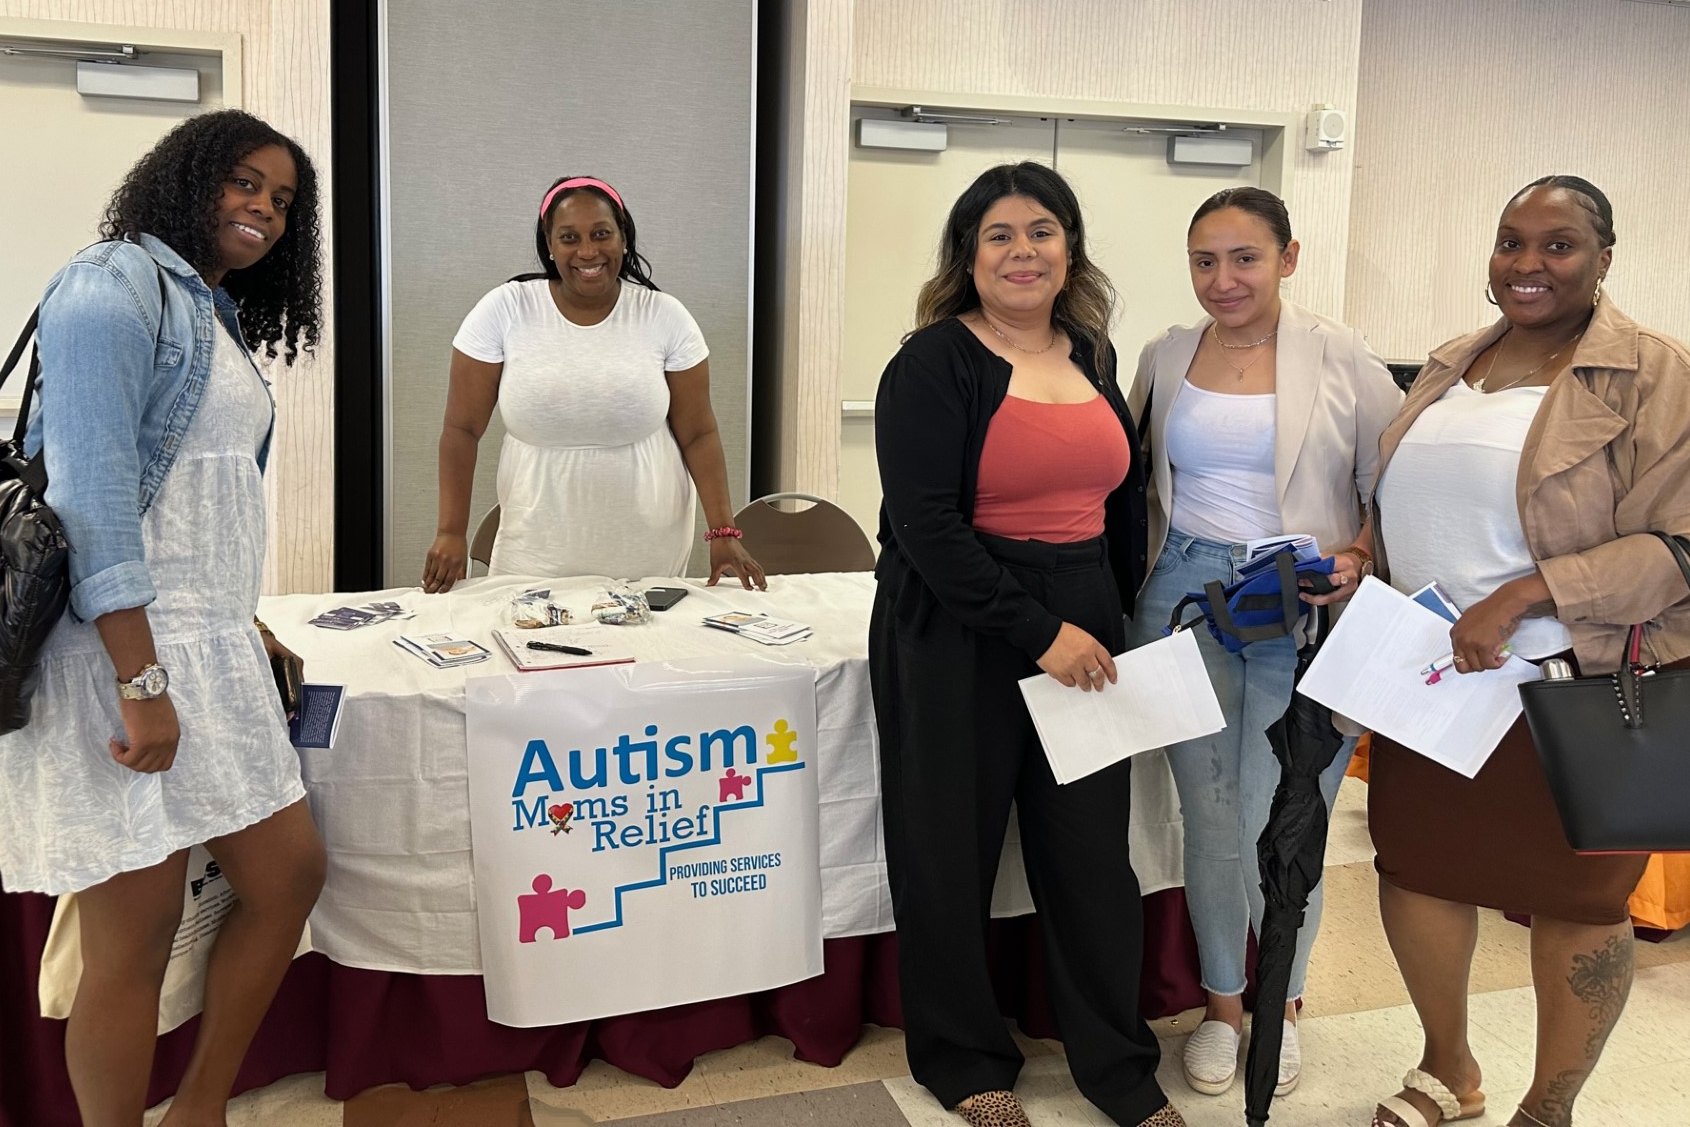 Five women stand near a promotional table for Autism.